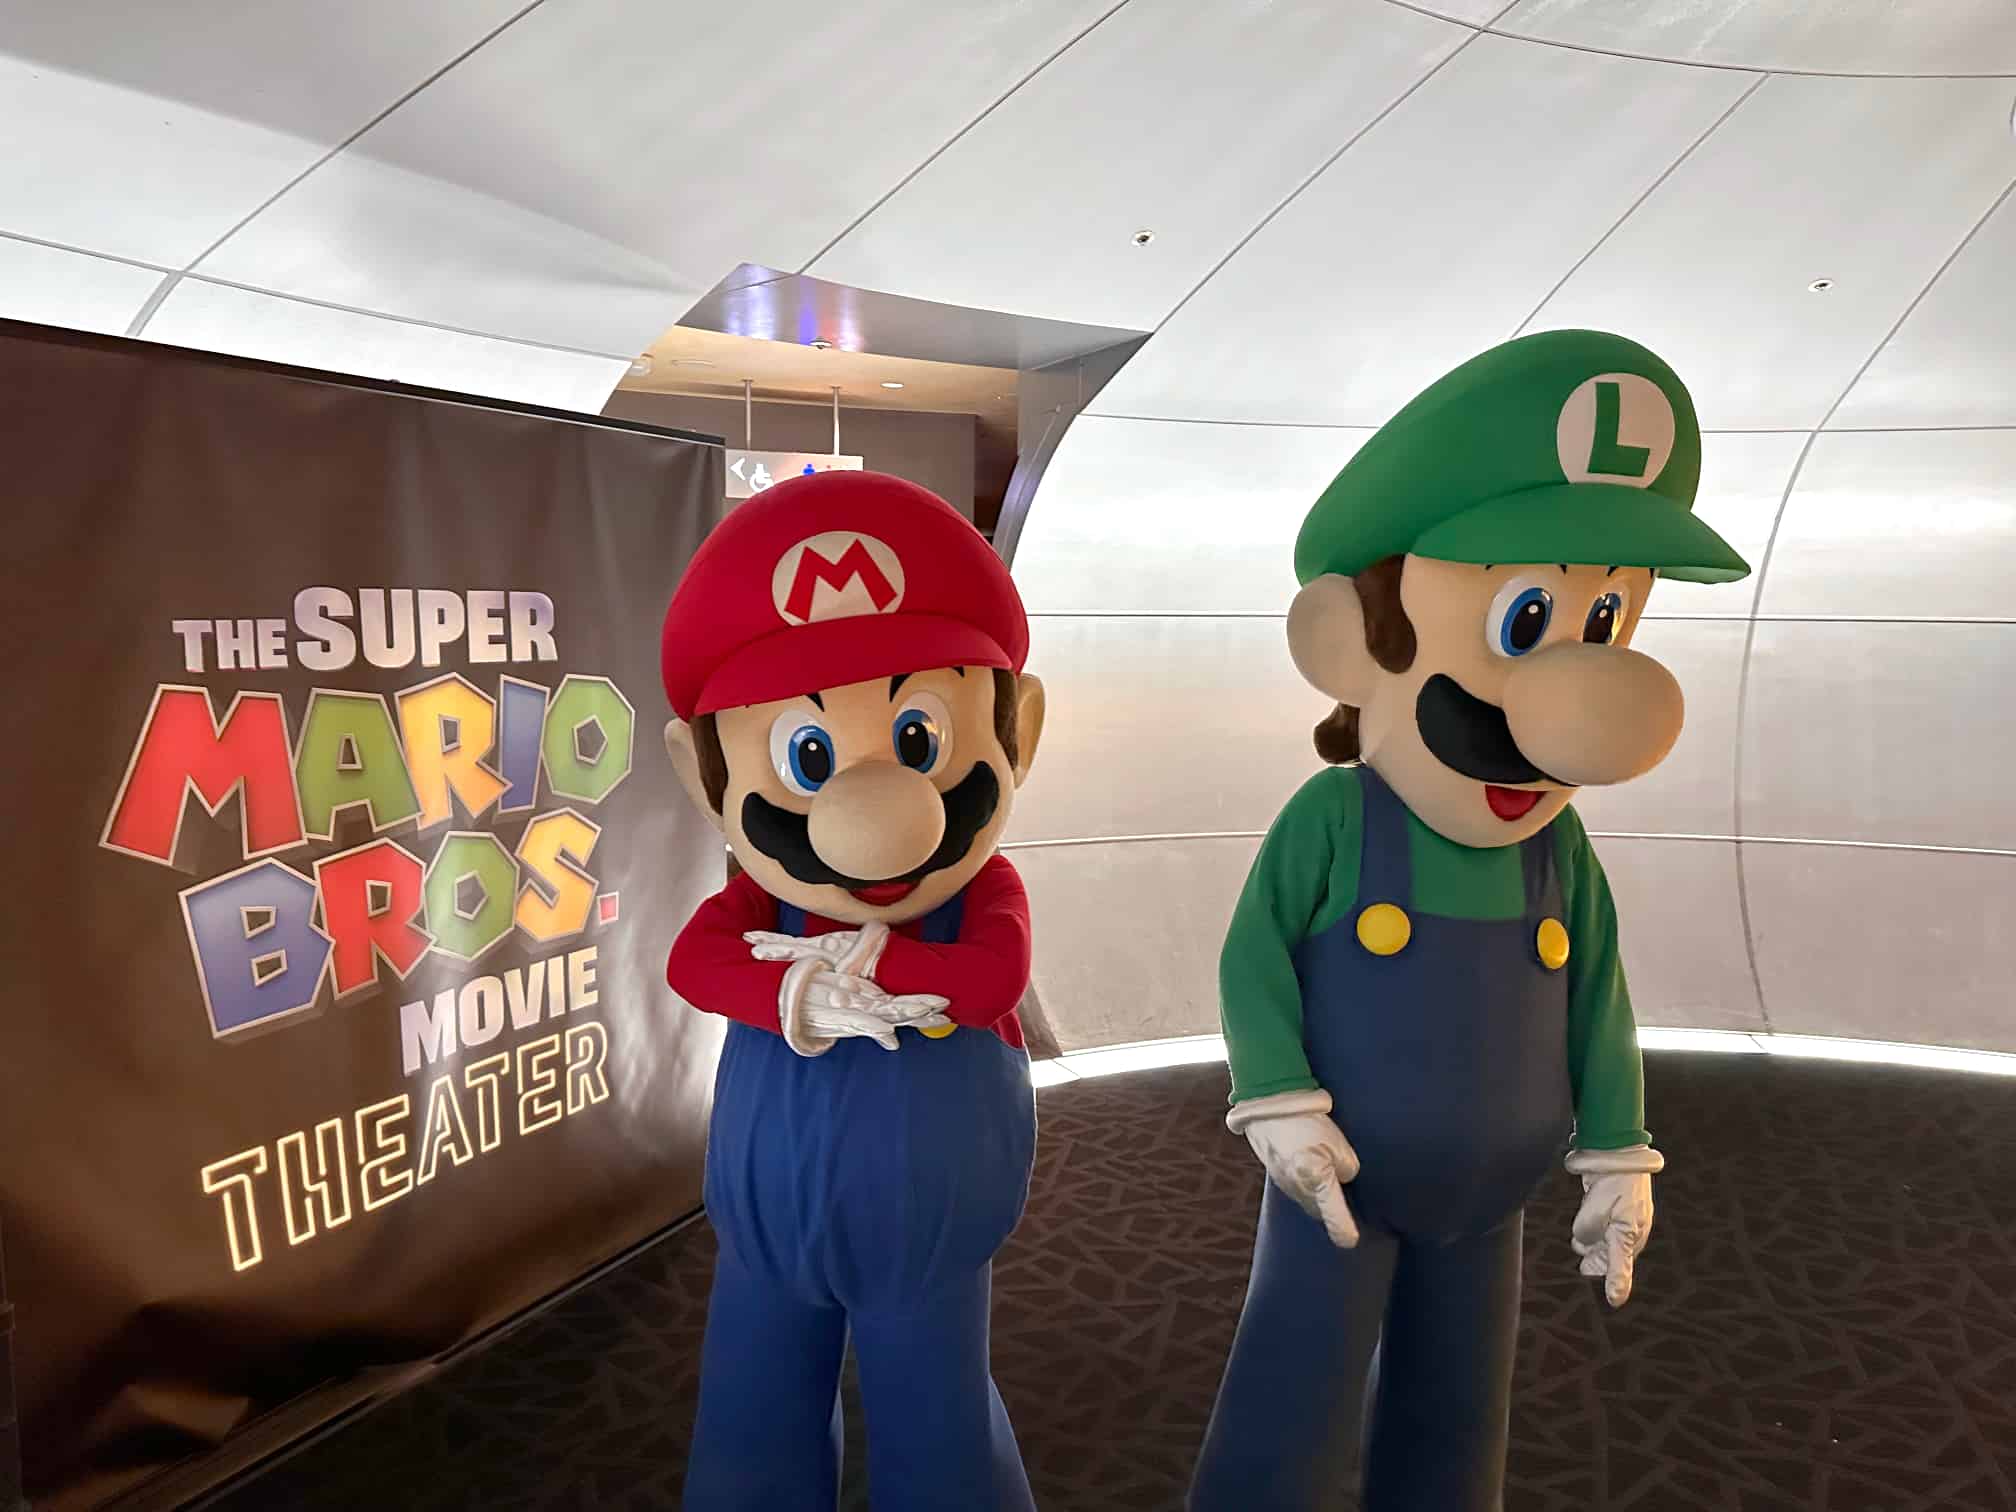 Mario and Luigi from the Super Mario franchise standing in a theater lobby, with a backdrop promoting The Super Mario Bros. Movie. Mario is on the left, wearing his signature red hat and blue overalls, while Luigi is on the right, in green and blue attire. They appear to be posing for a photograph